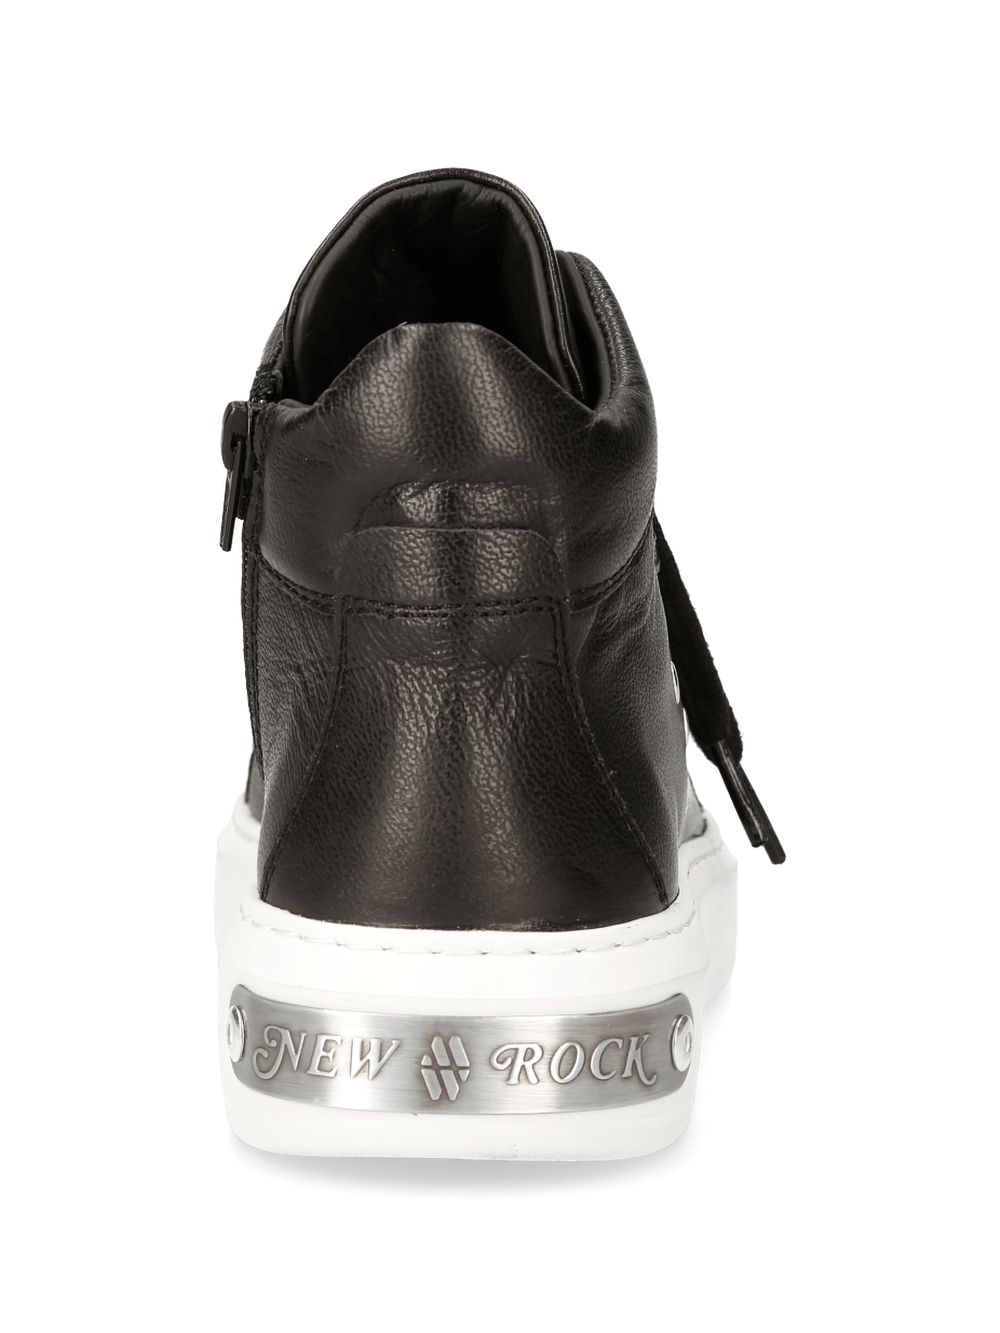 NEW ROCK Stylish Urban Punk Leather Sneakers With Lace-Up